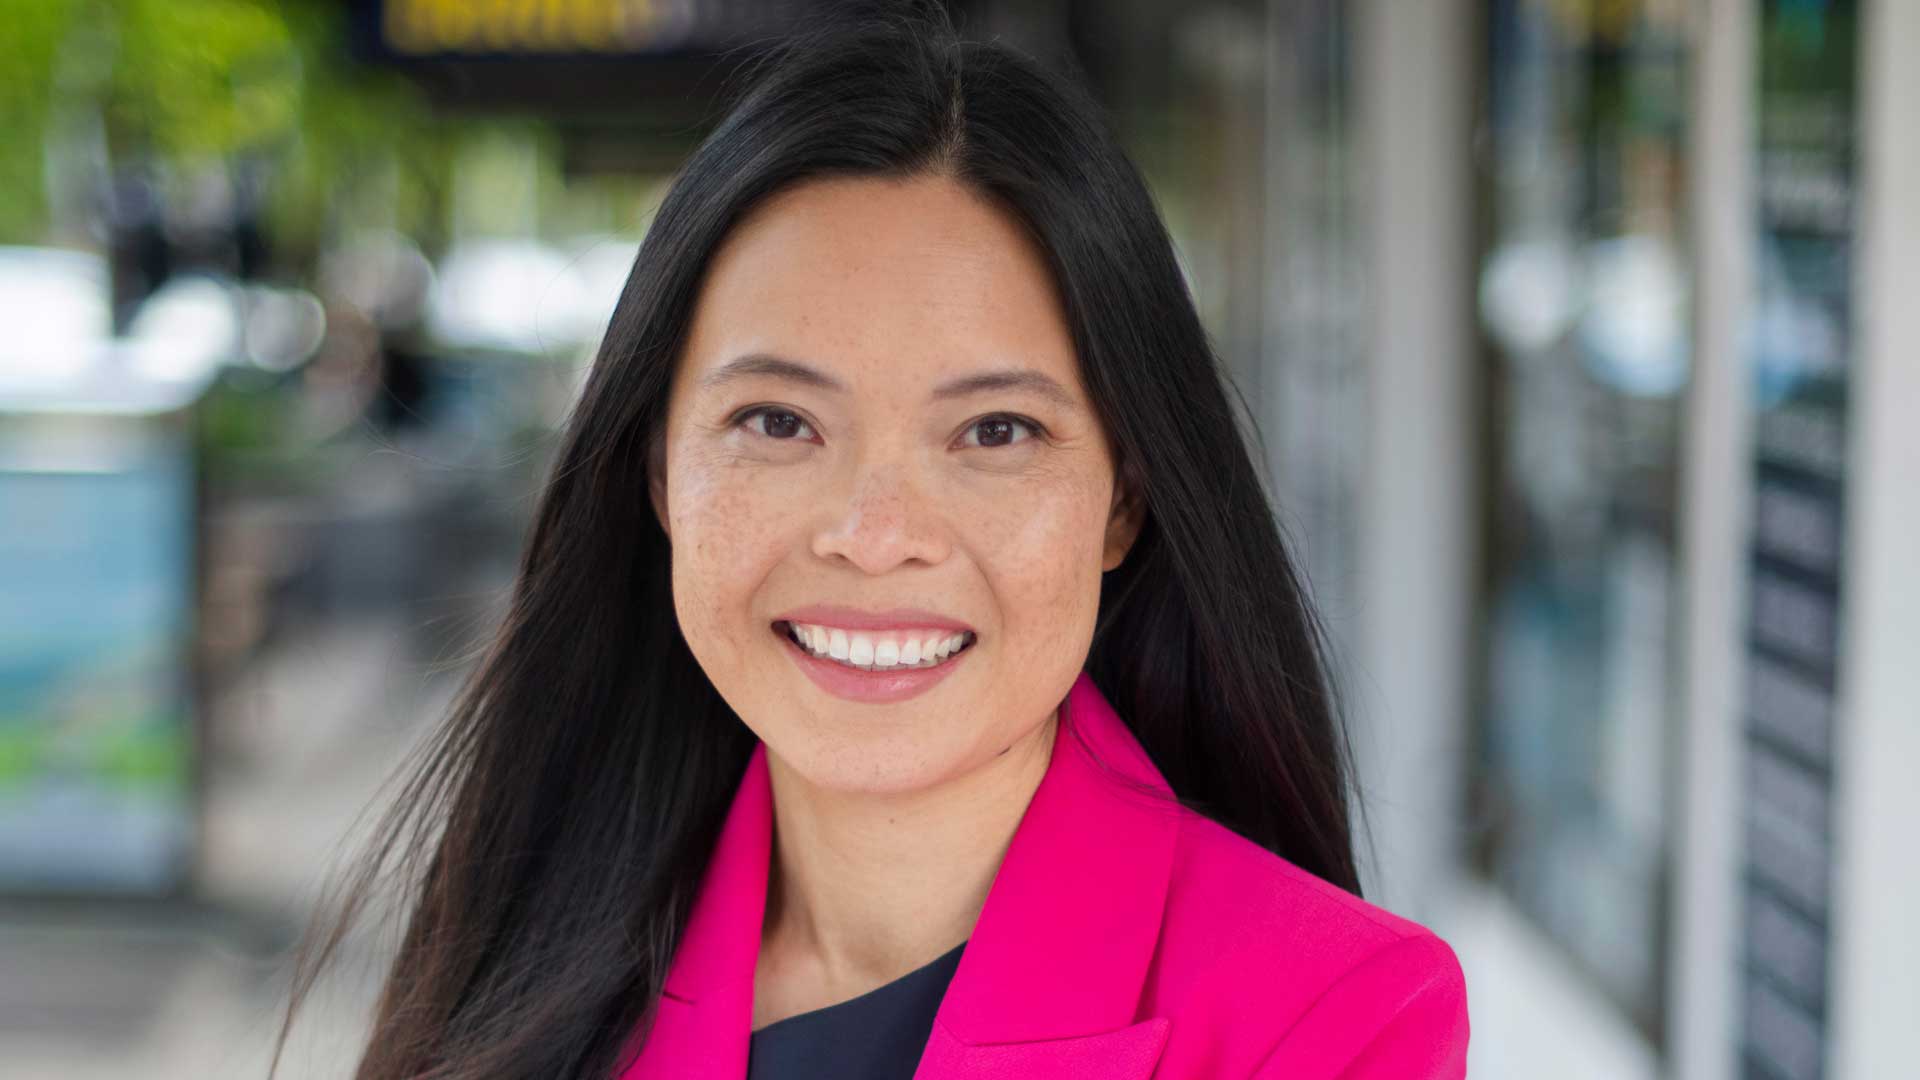 Photograph of Sally Sitou: smiling asian woman wearing a bright pink blazer